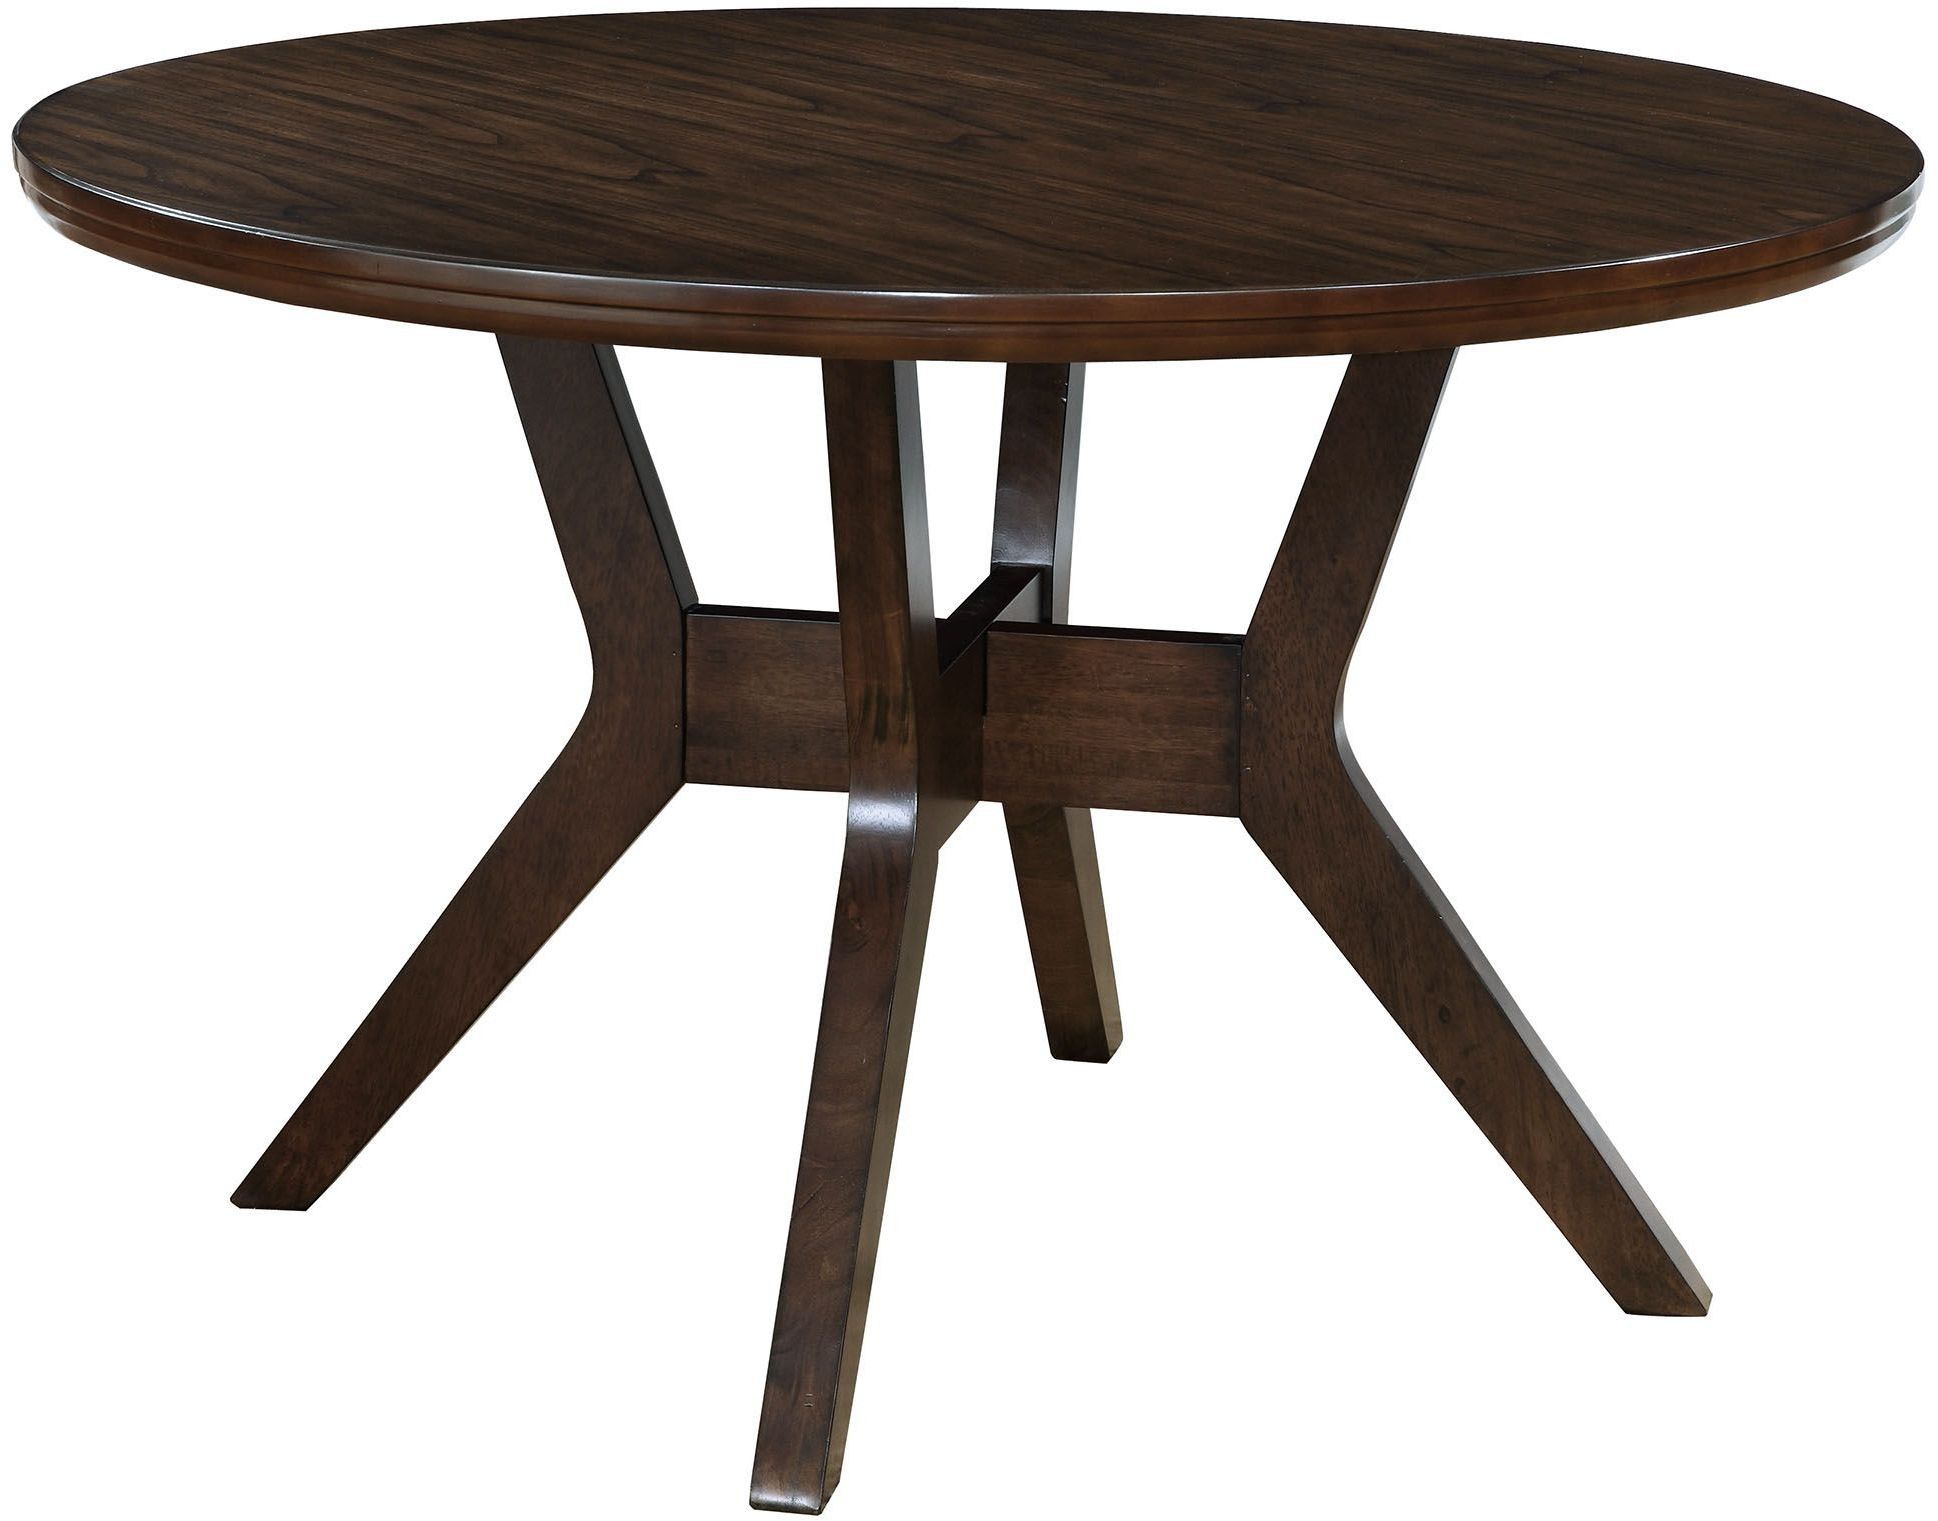 Abelone Walnut Round Dining Table From Furniture Of With Regard To Recent Walnut And White Dining Tables (View 12 of 15)